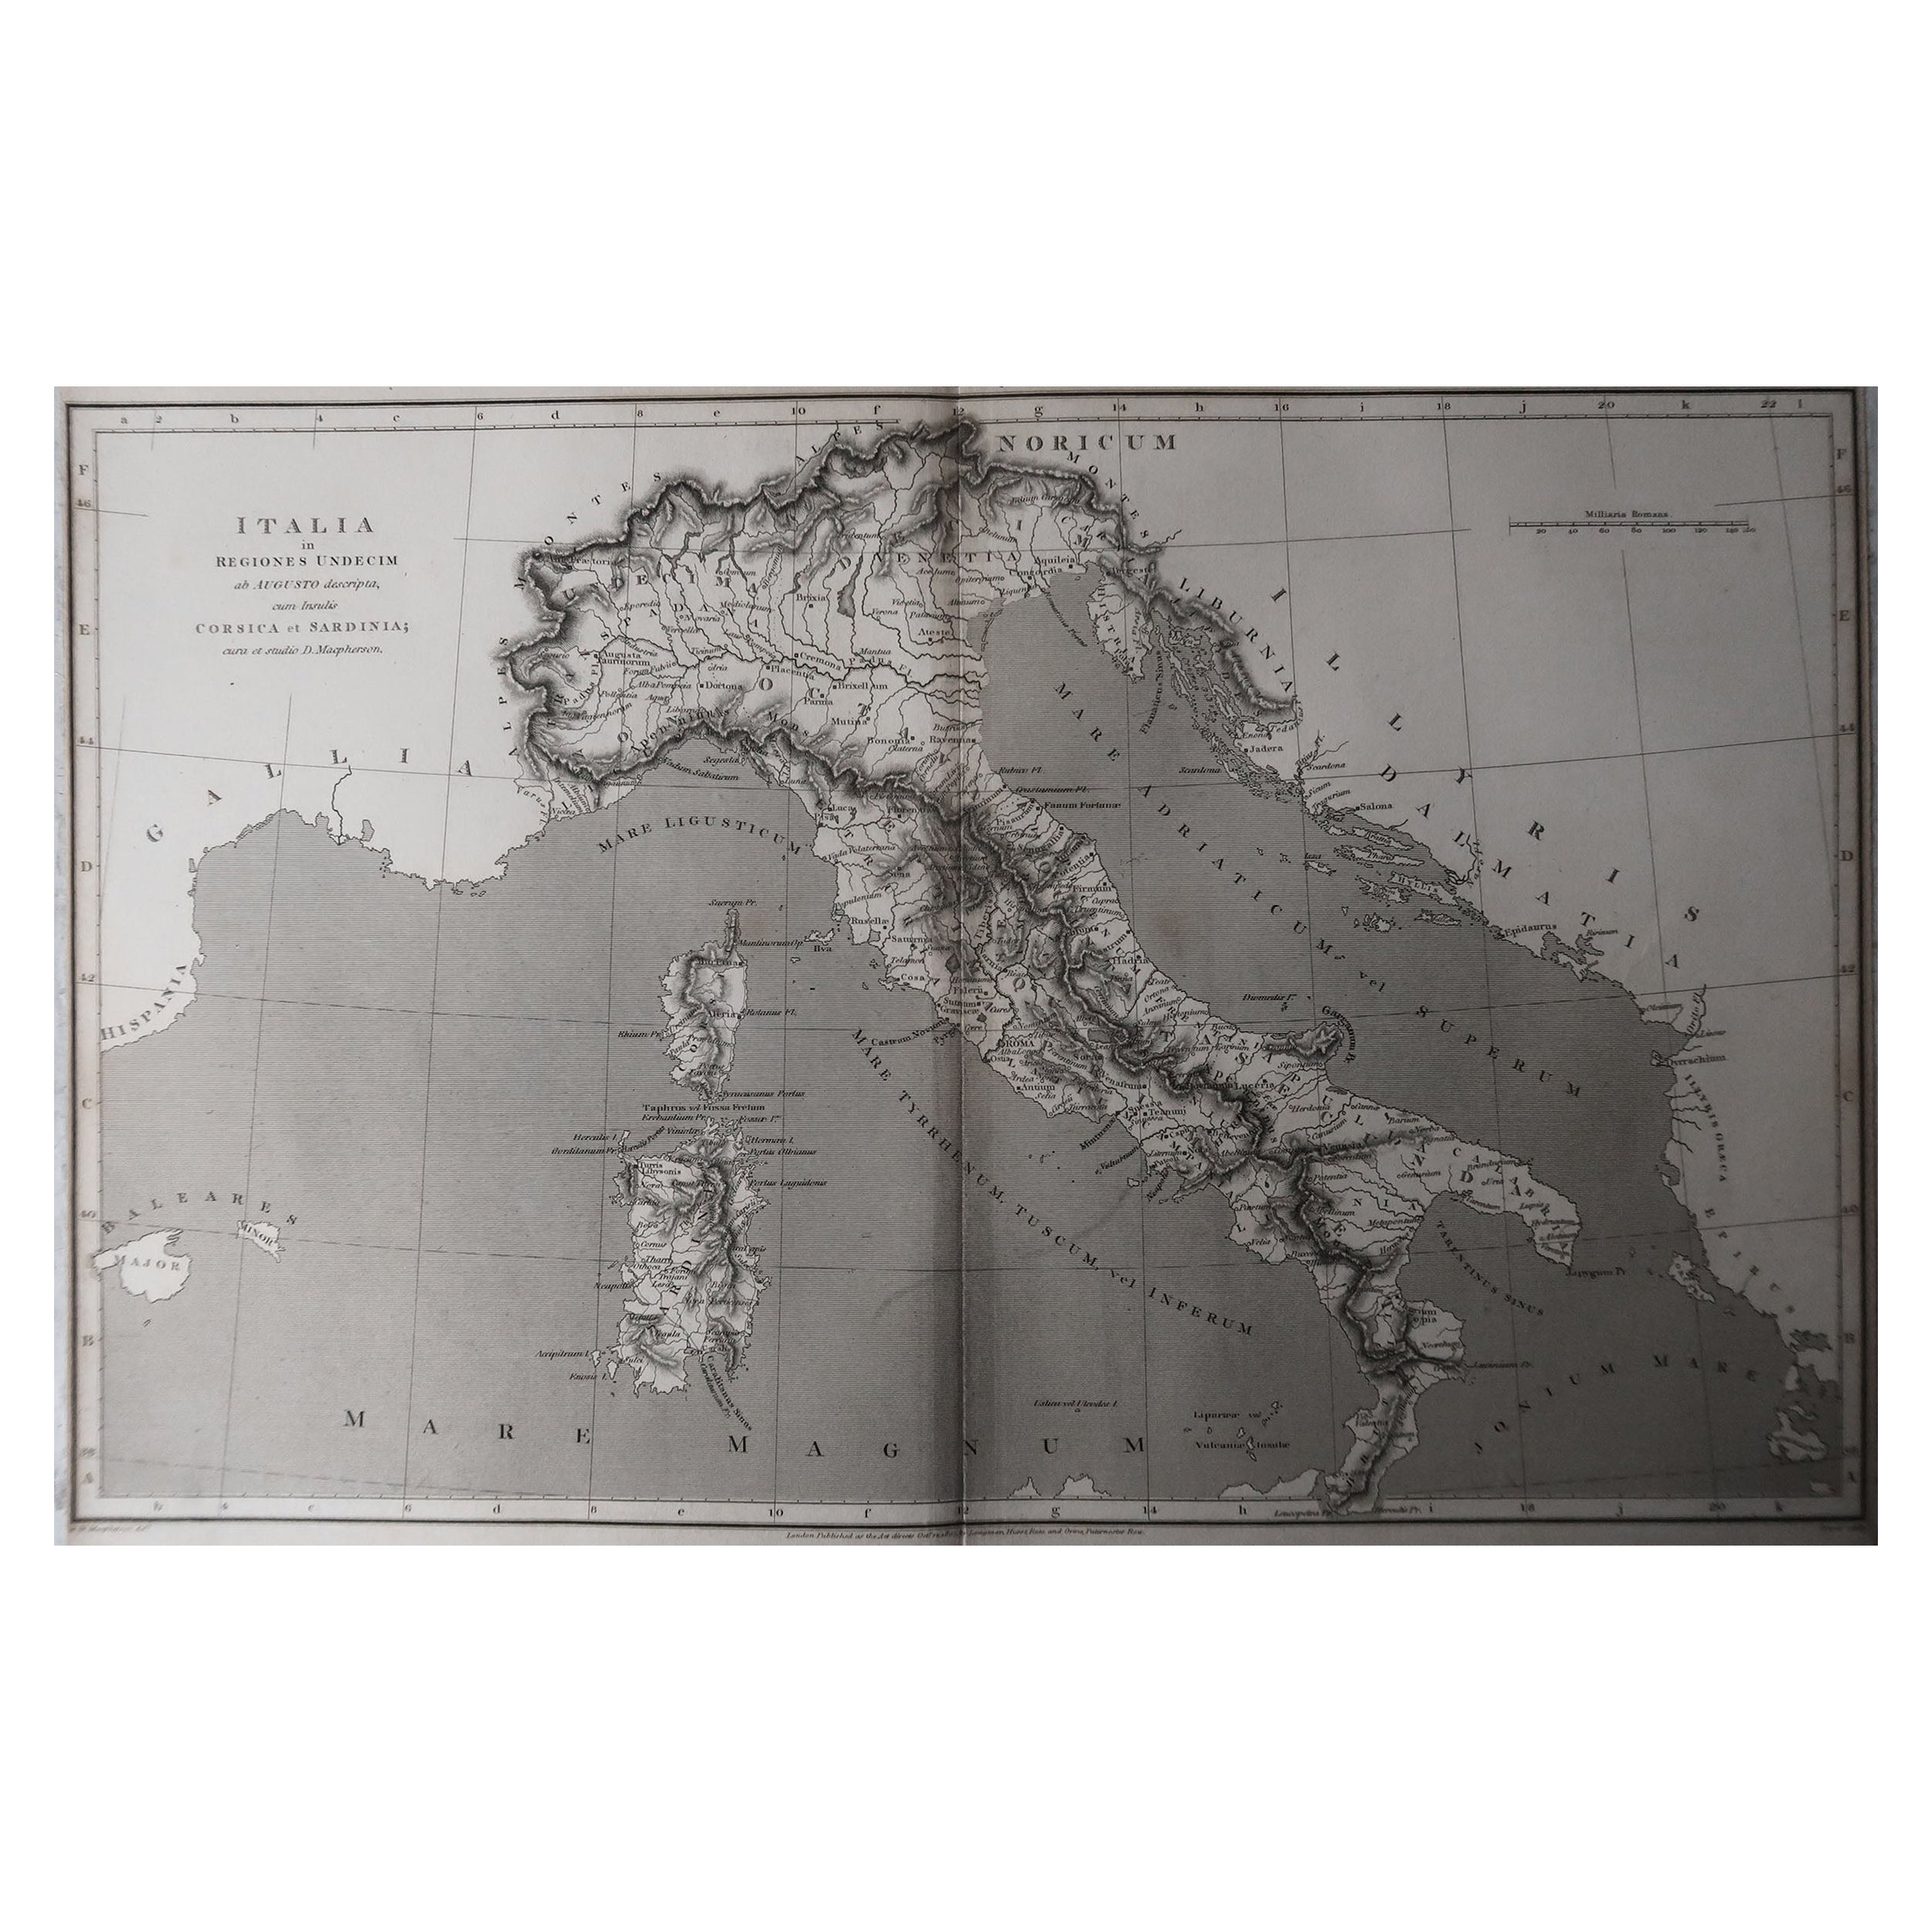 Great map of Italy

Drawn under the direction of Arrowsmith

Copper-plate engraving

Published by Longman, Hurst, Rees, Orme and Brown, 1820

Unframed.